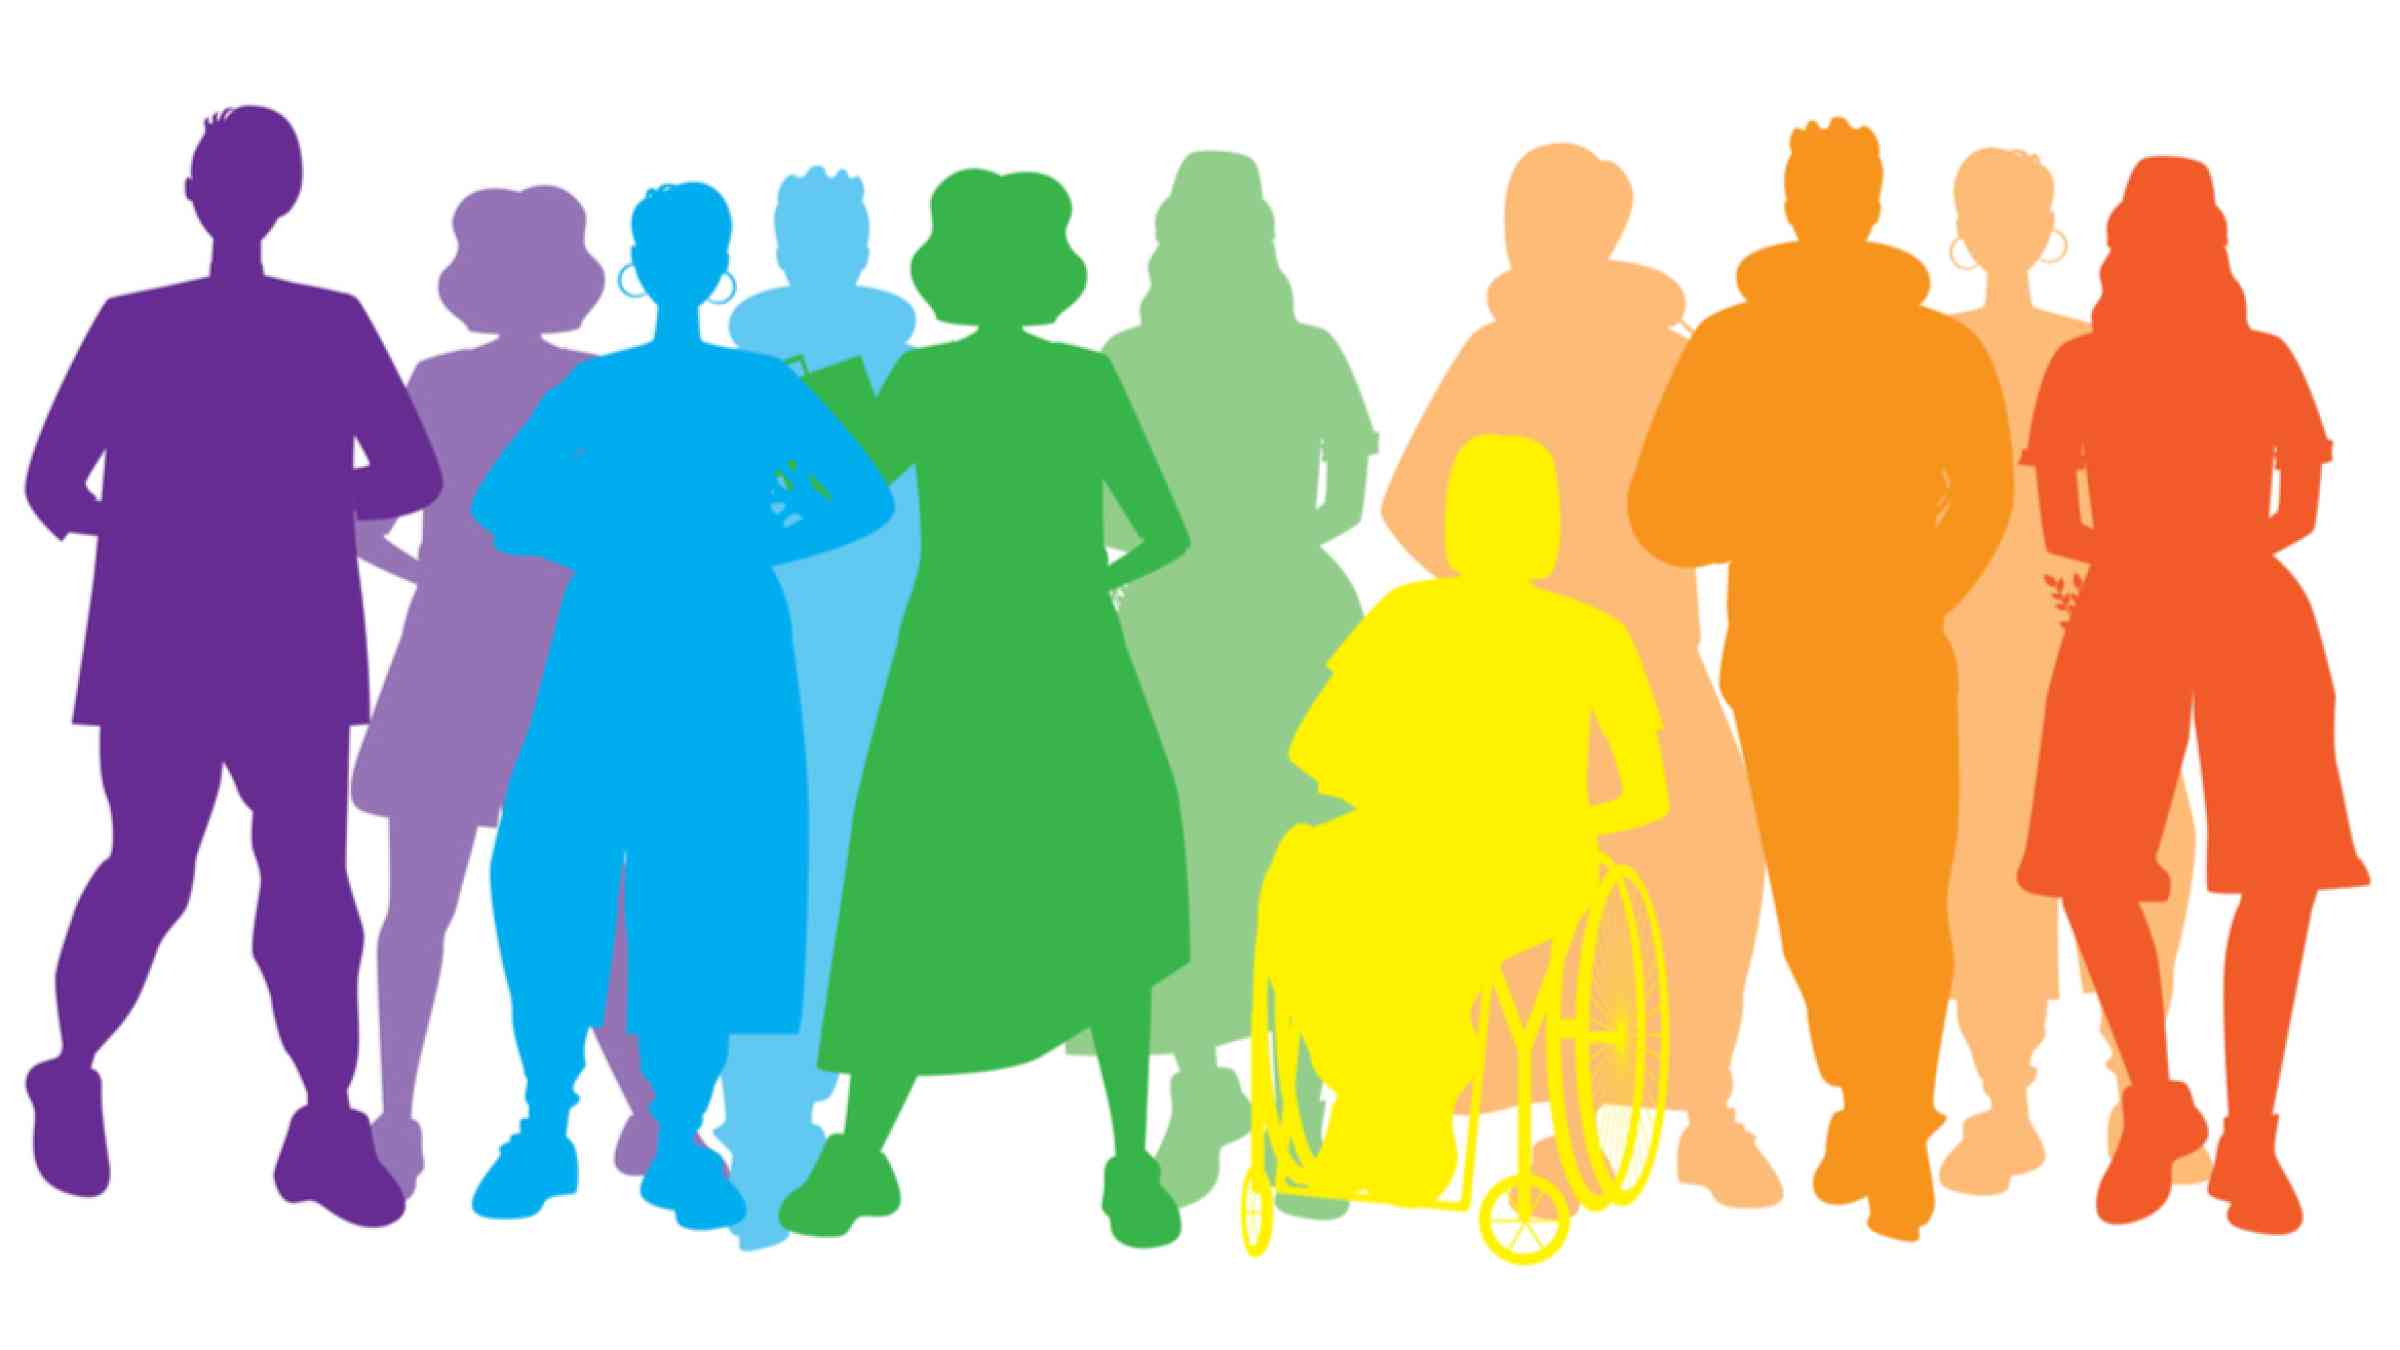 Vector image displaying characters in LGBT+ colors